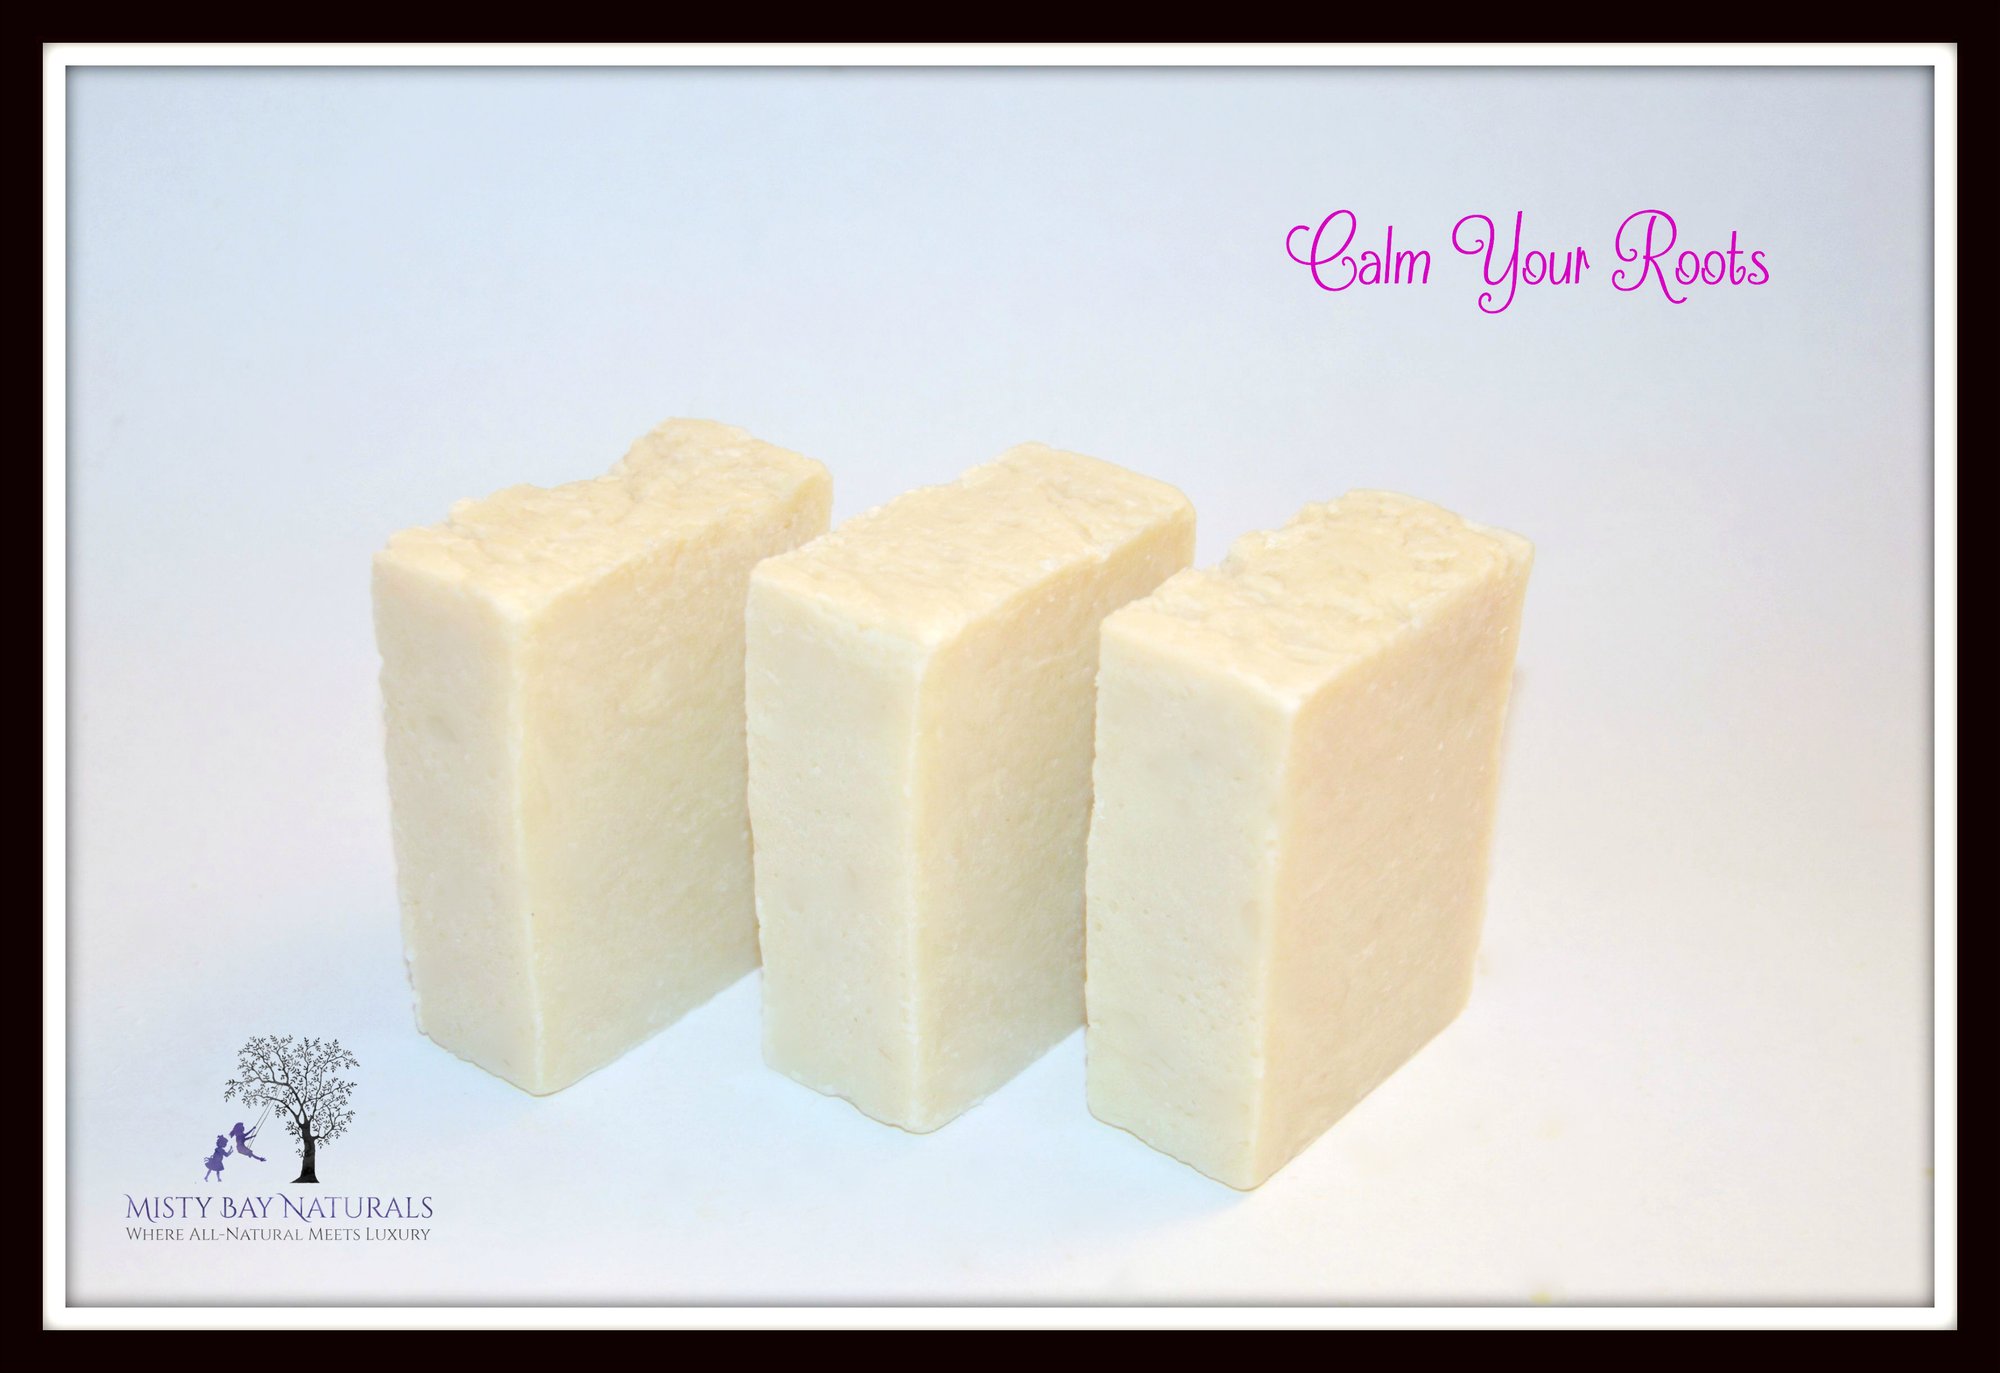 Misty Bay Naturals — Calm Your Roots (shampoo bar)